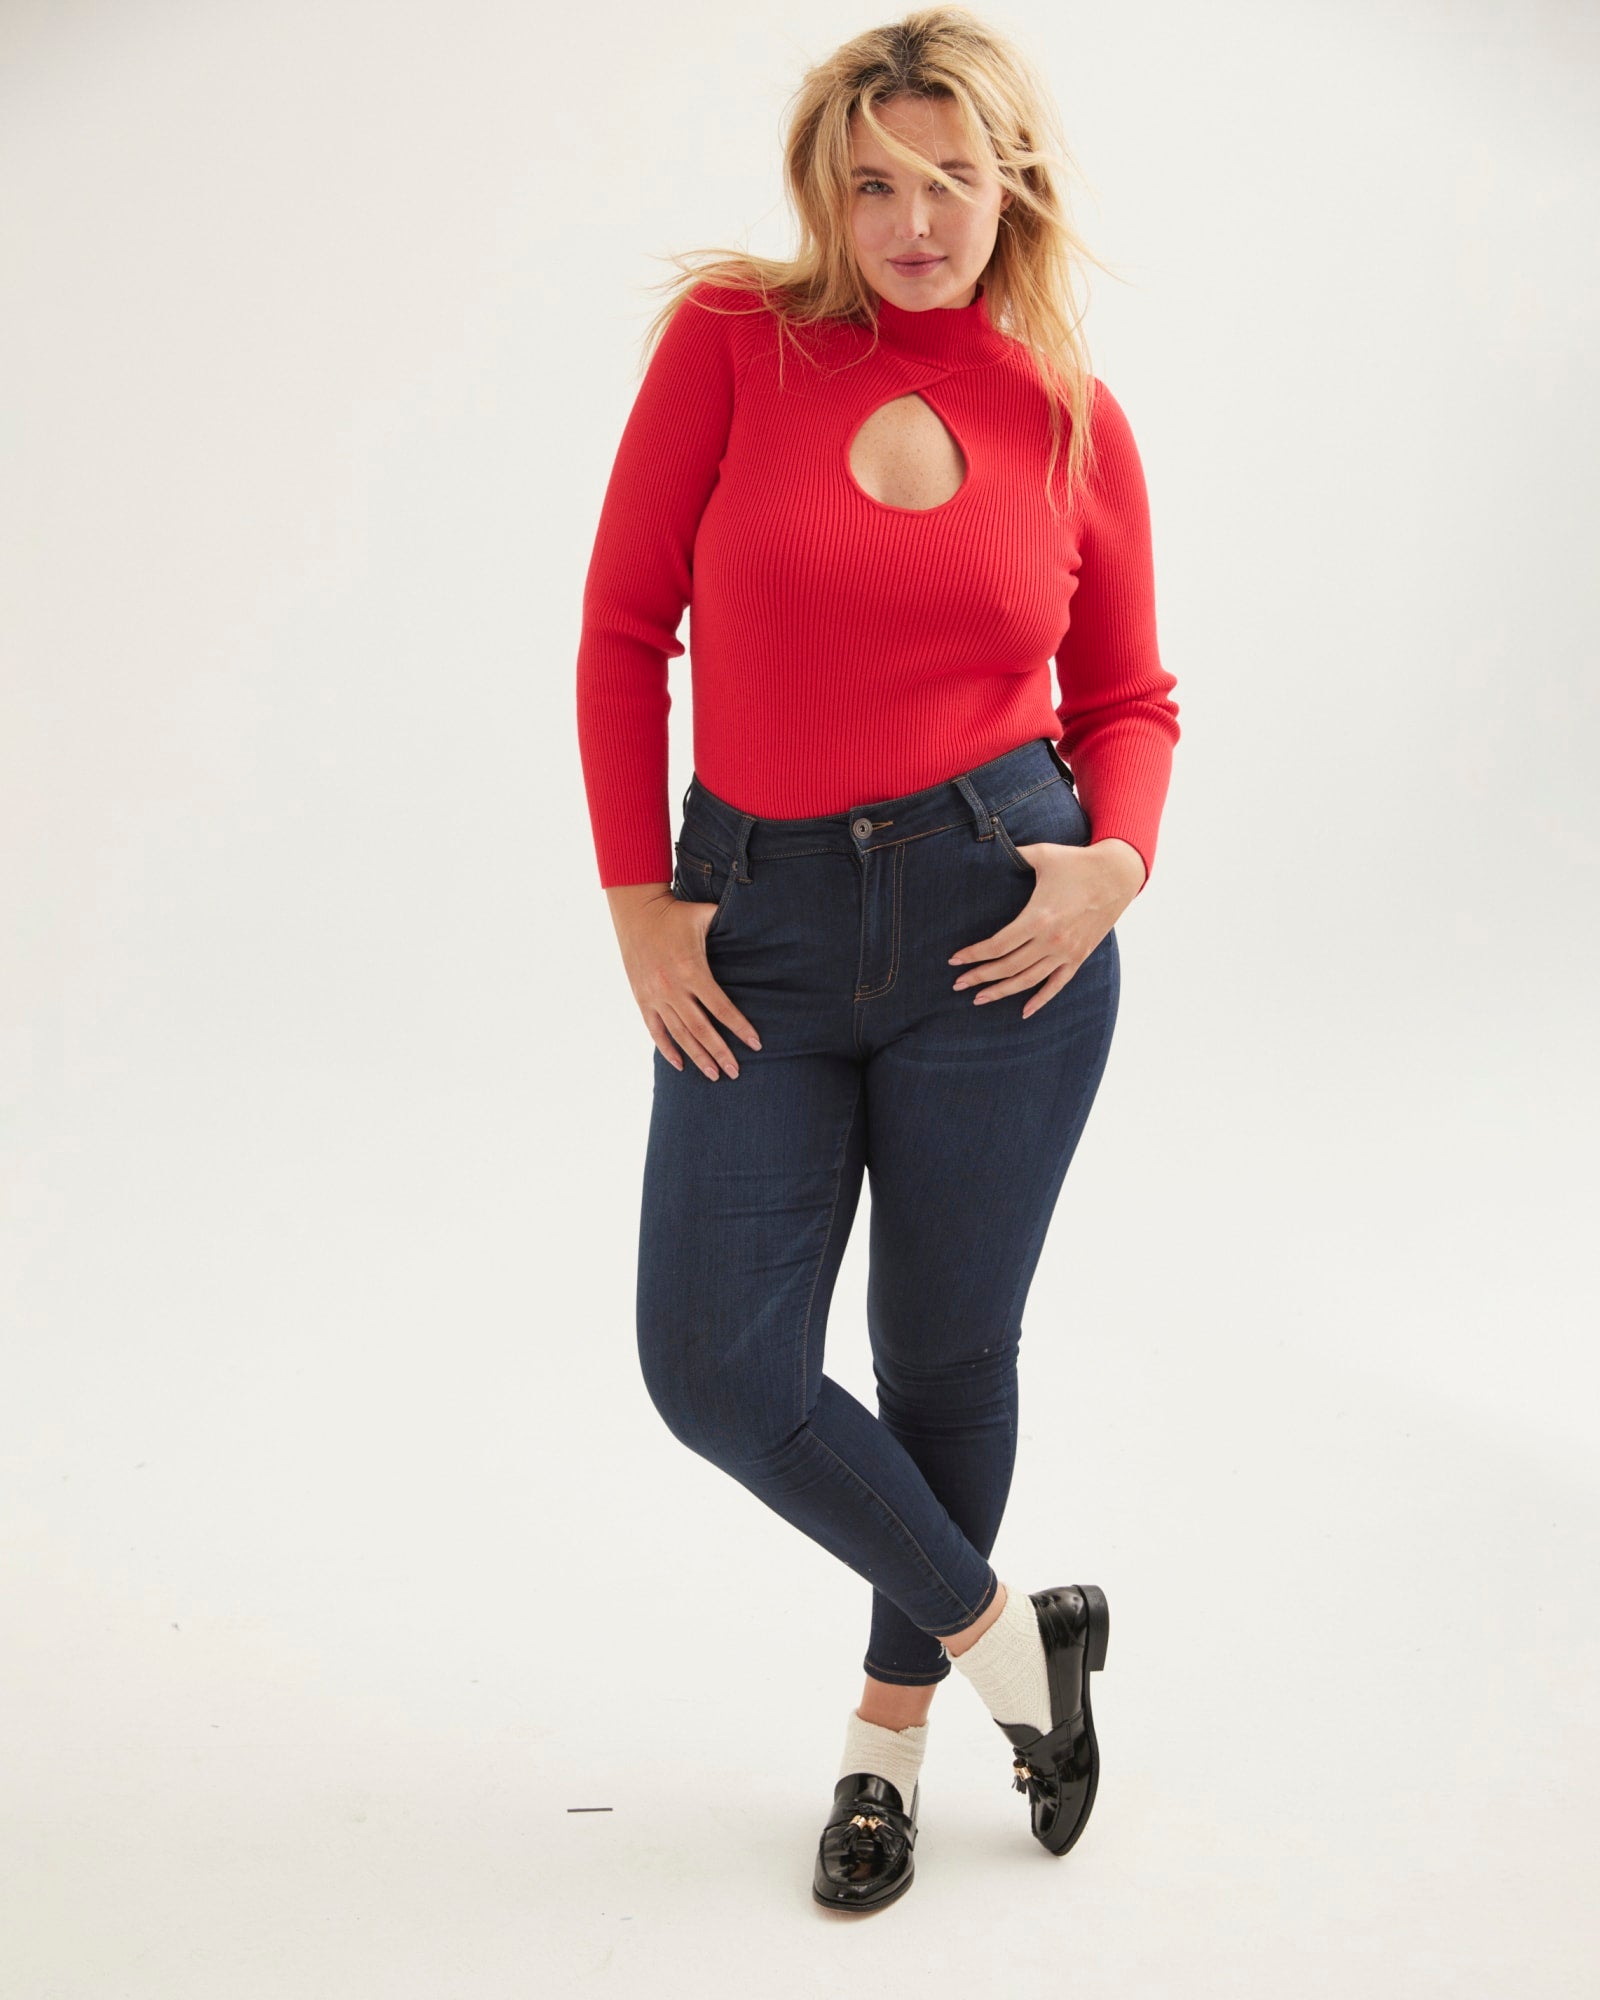 High Rise Booty Shaper Skinny Jean at Seven7 Jeans